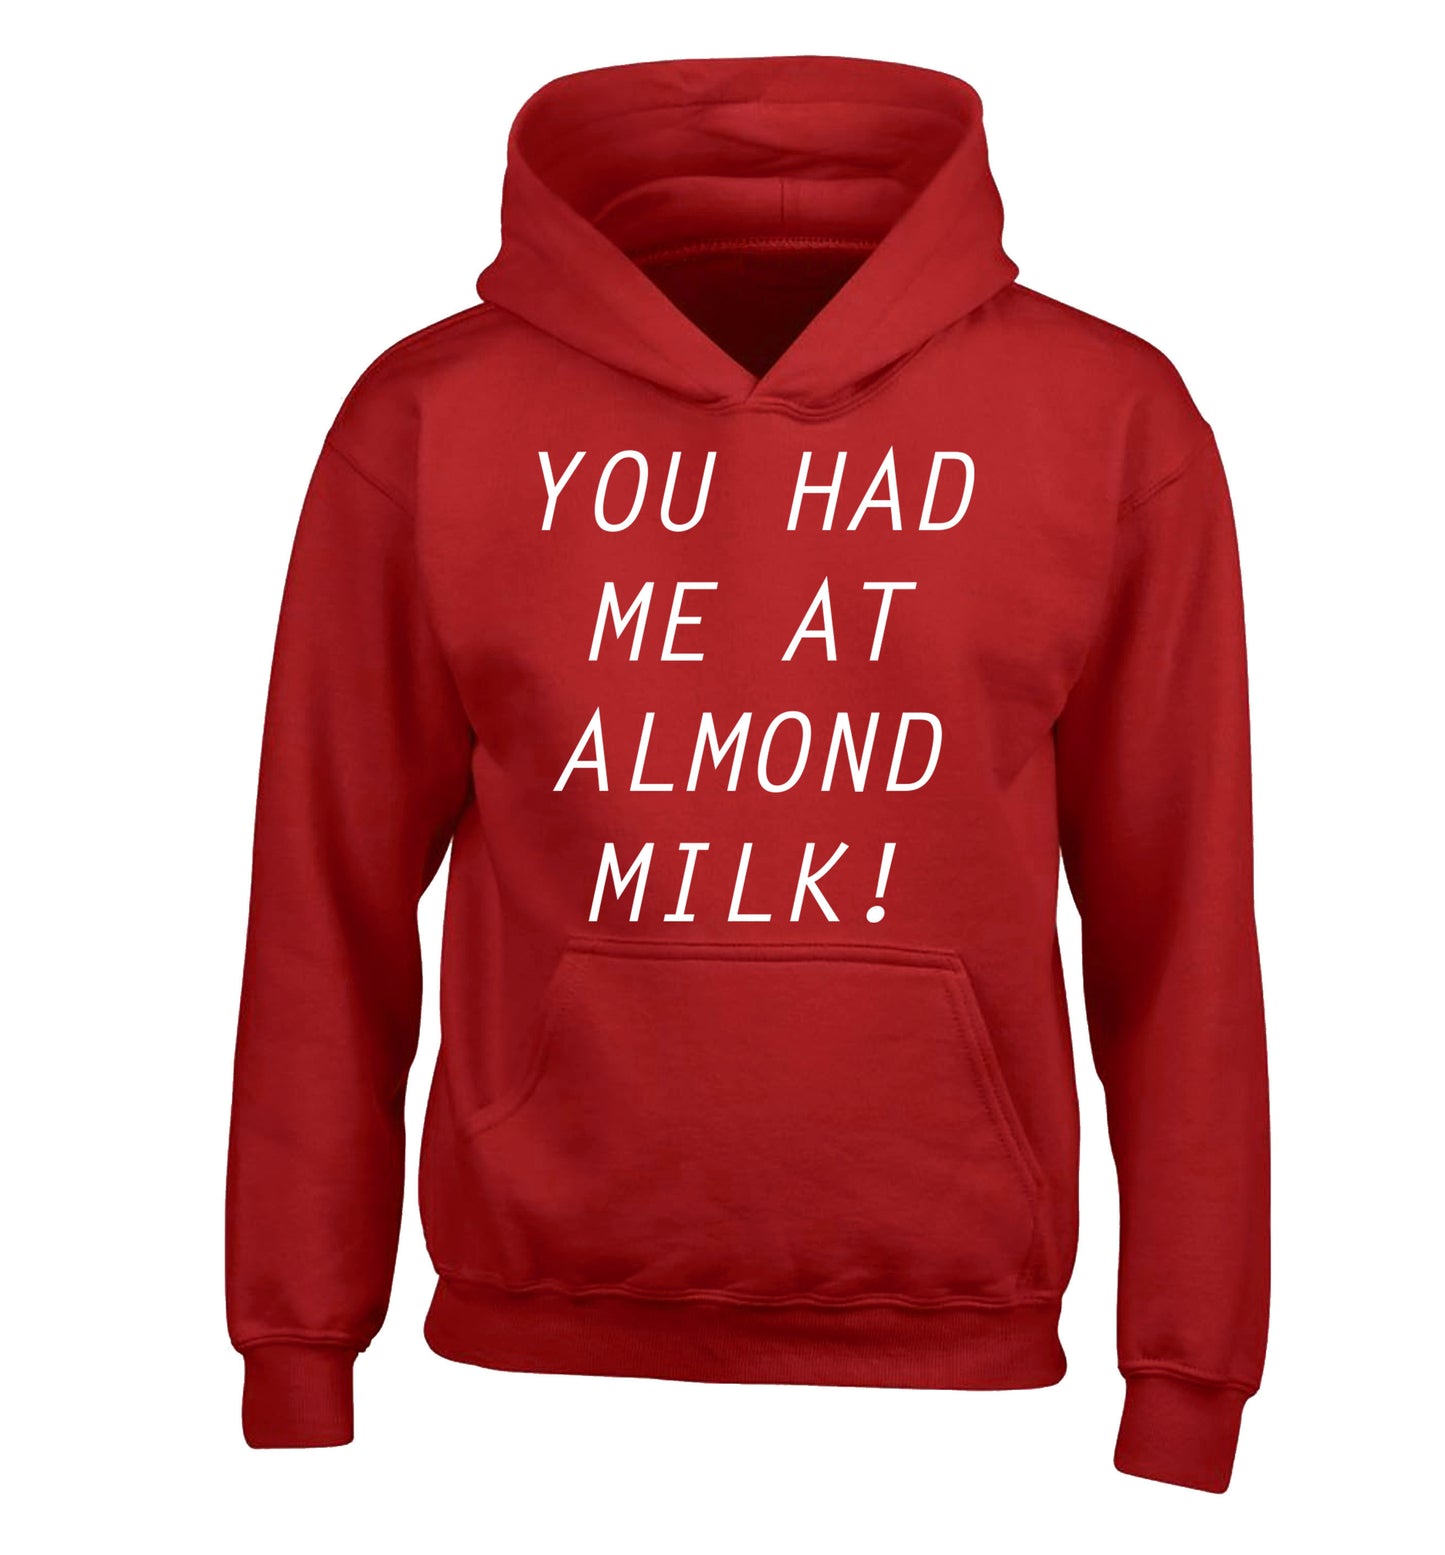 You had me at almond milk children's red hoodie 12-14 Years